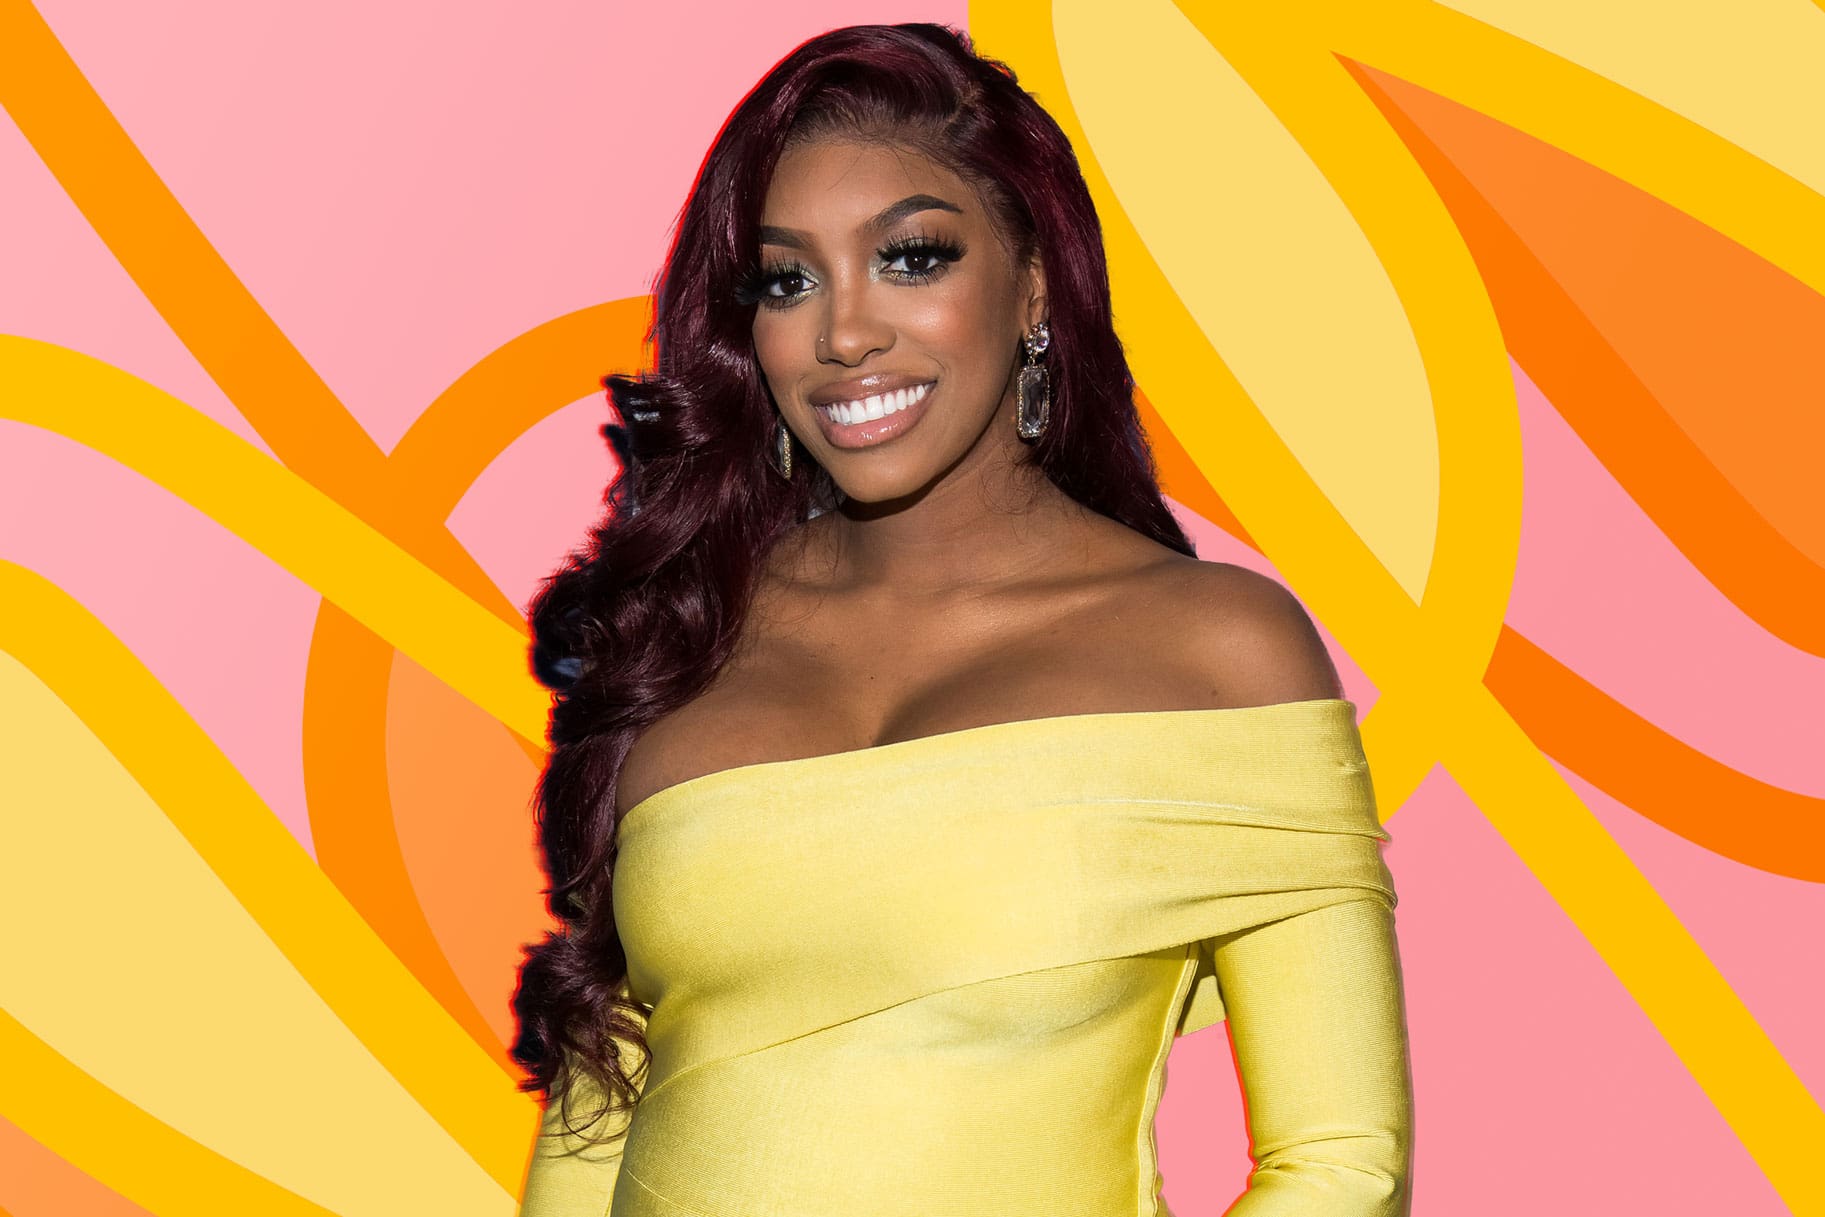 Porsha Williams Announces Her Bravo Special On April 28: 'We Are Having A Baby' - Here's The Sneak Peek